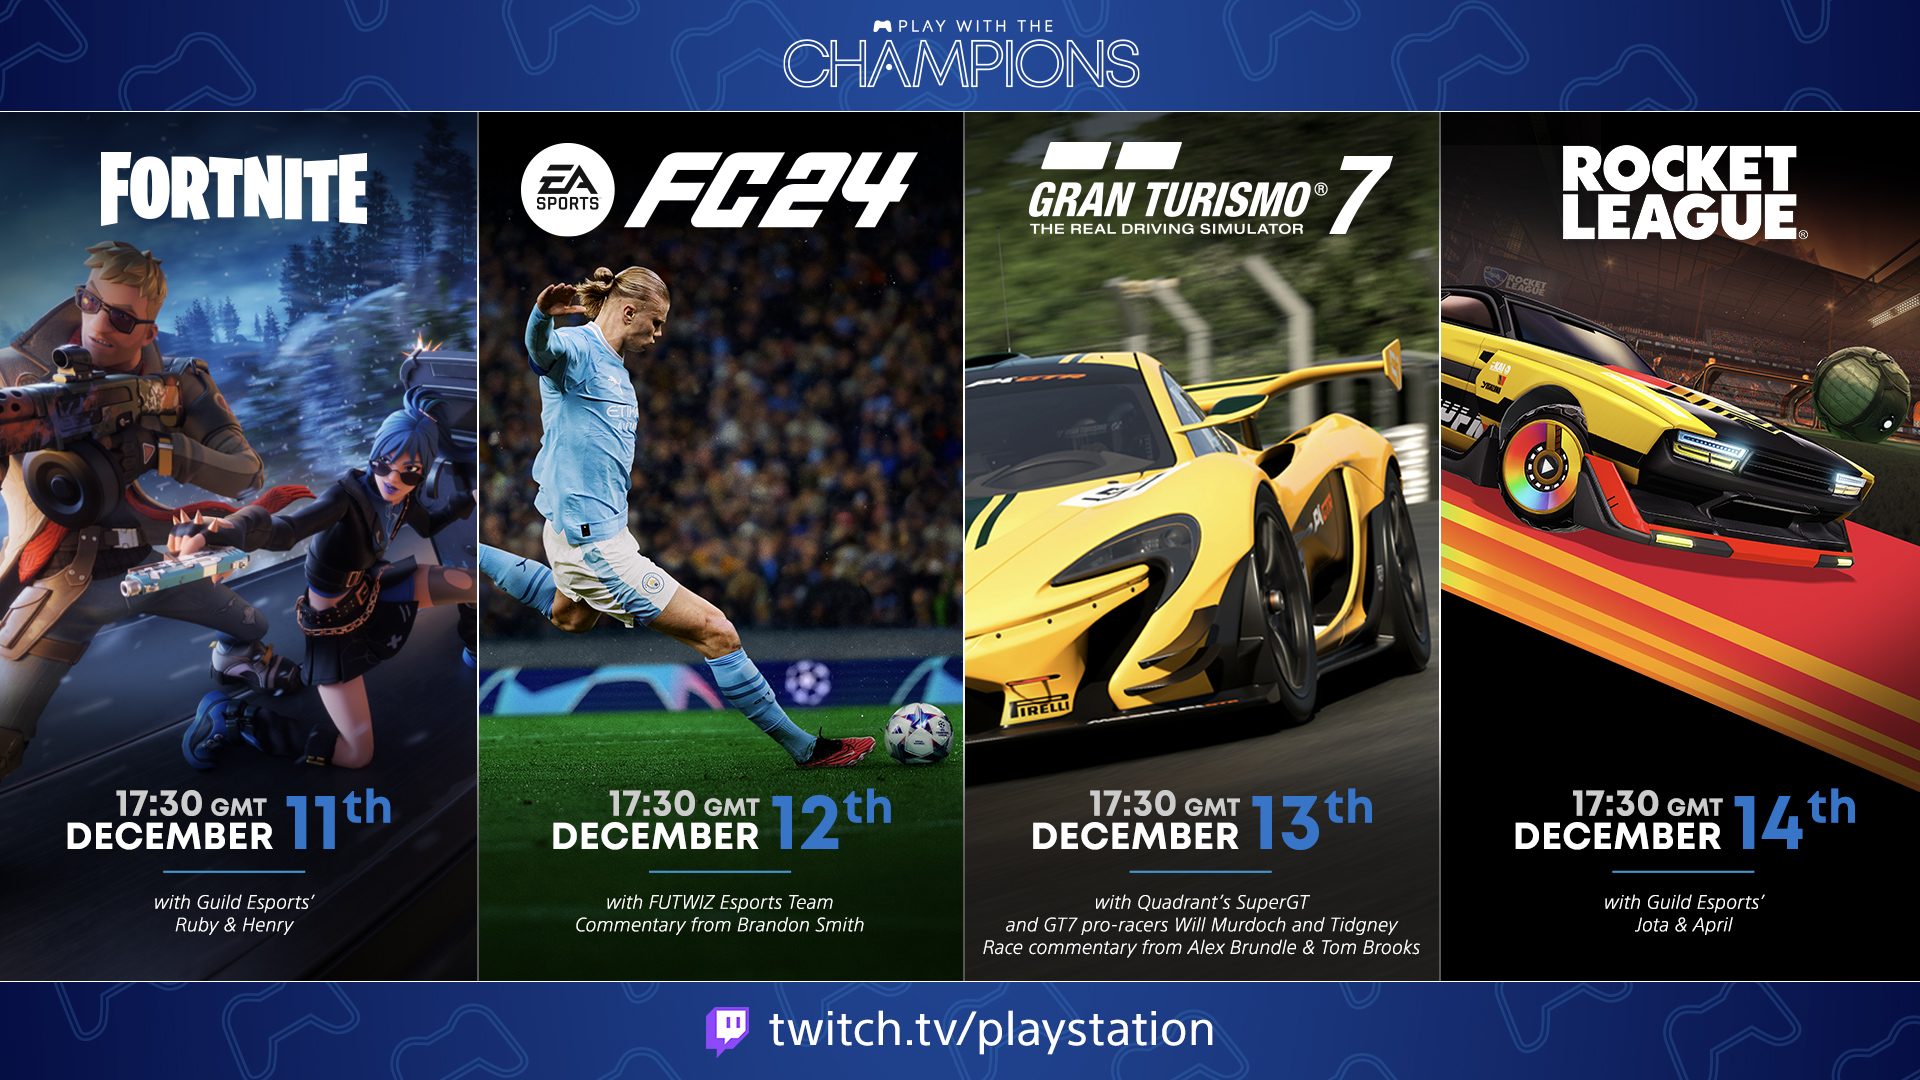 Play with the Champions finals stream this week – tune in Dec 11